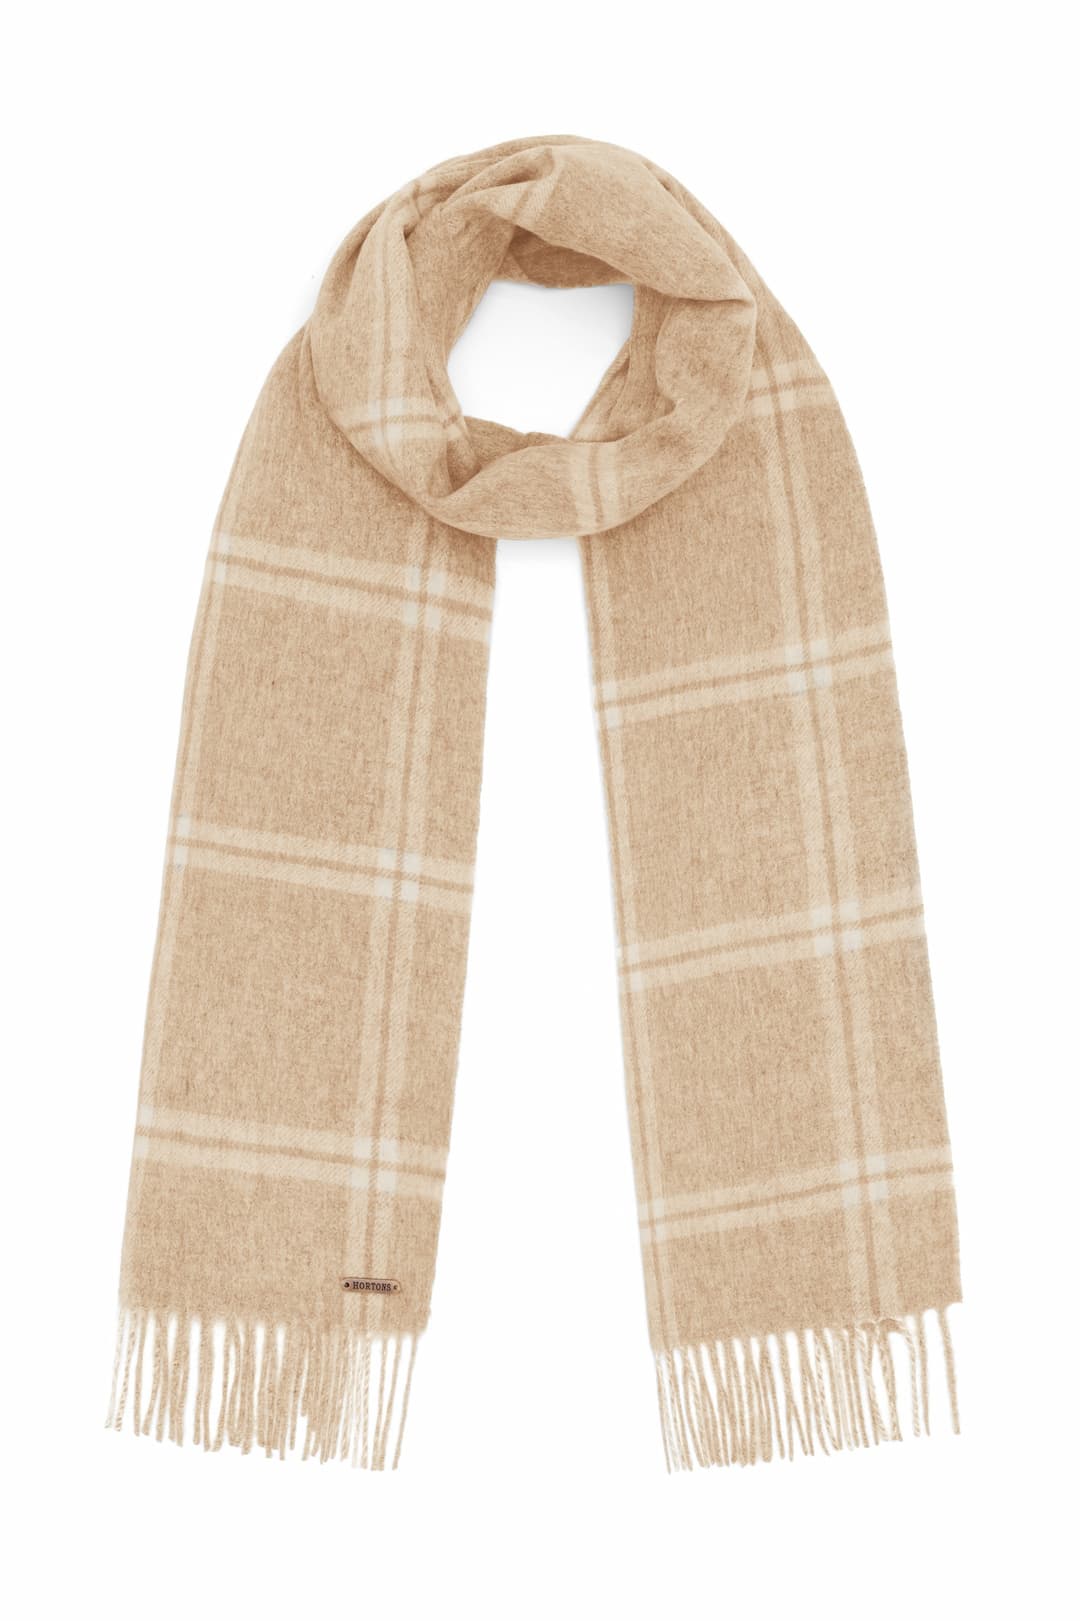 Hortons England - 100% Lambswool Checked Scarf - Sand